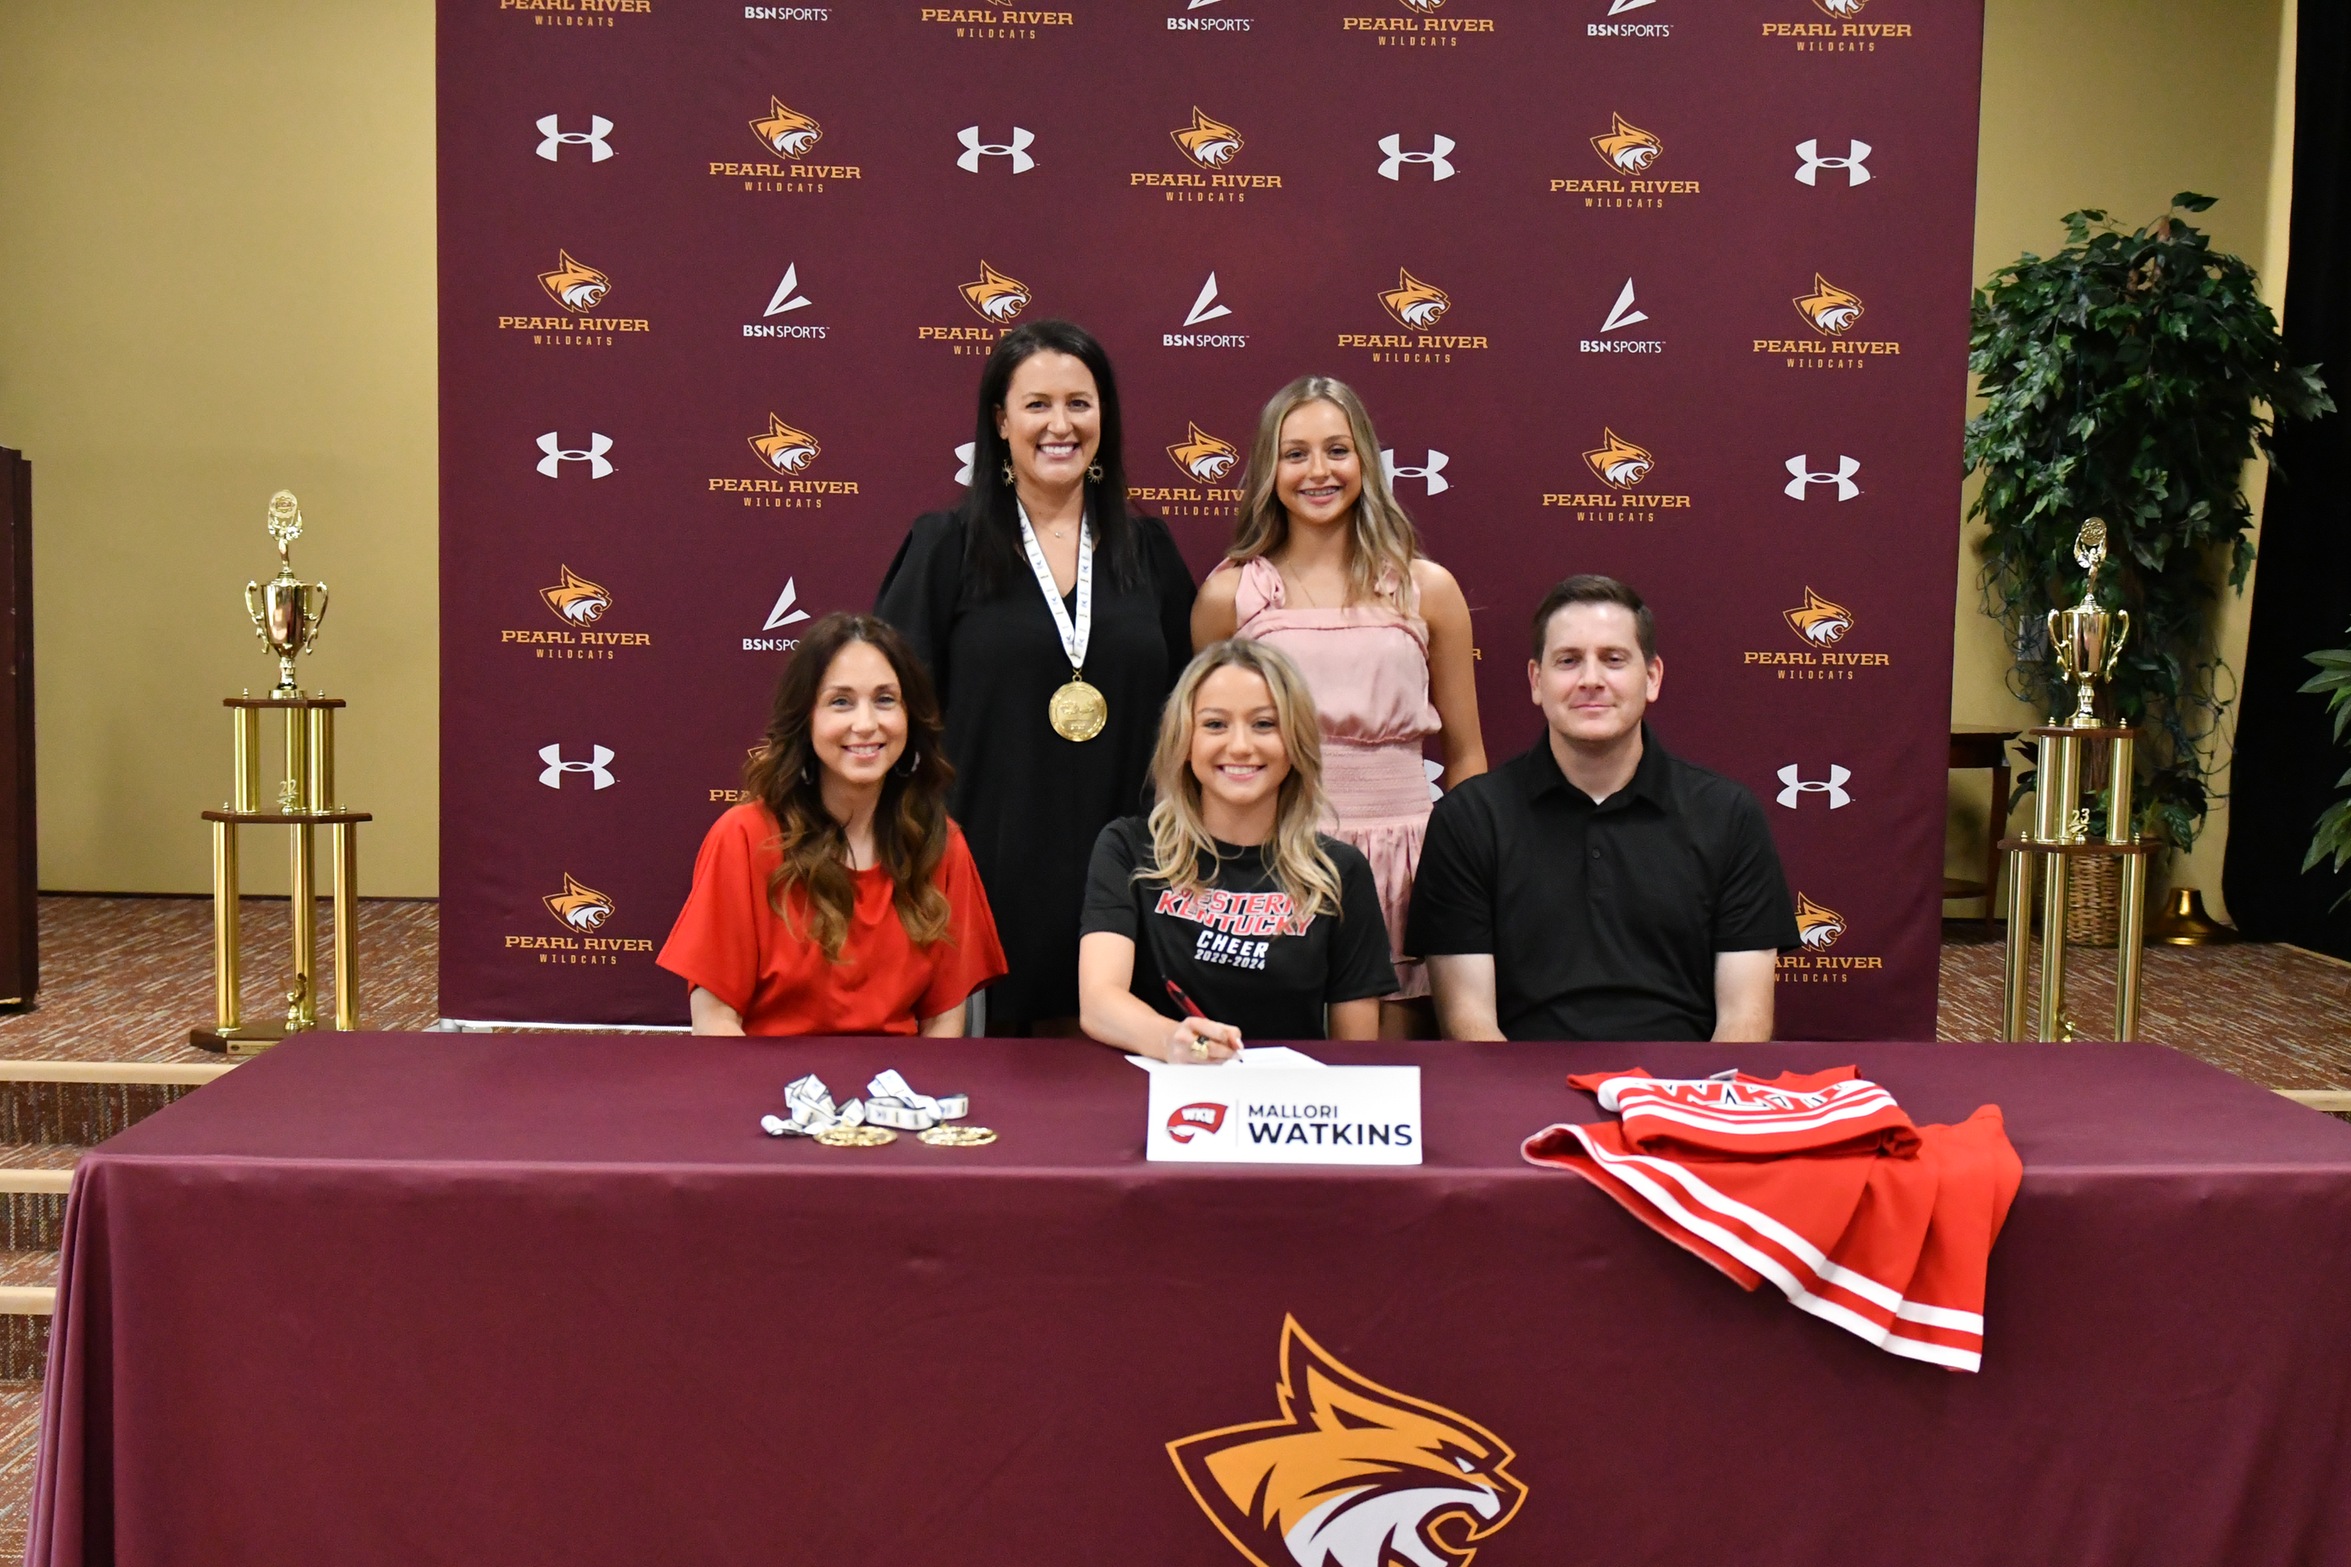 Pearl River cheer's Mallori Watkins signs with Western Kentucky